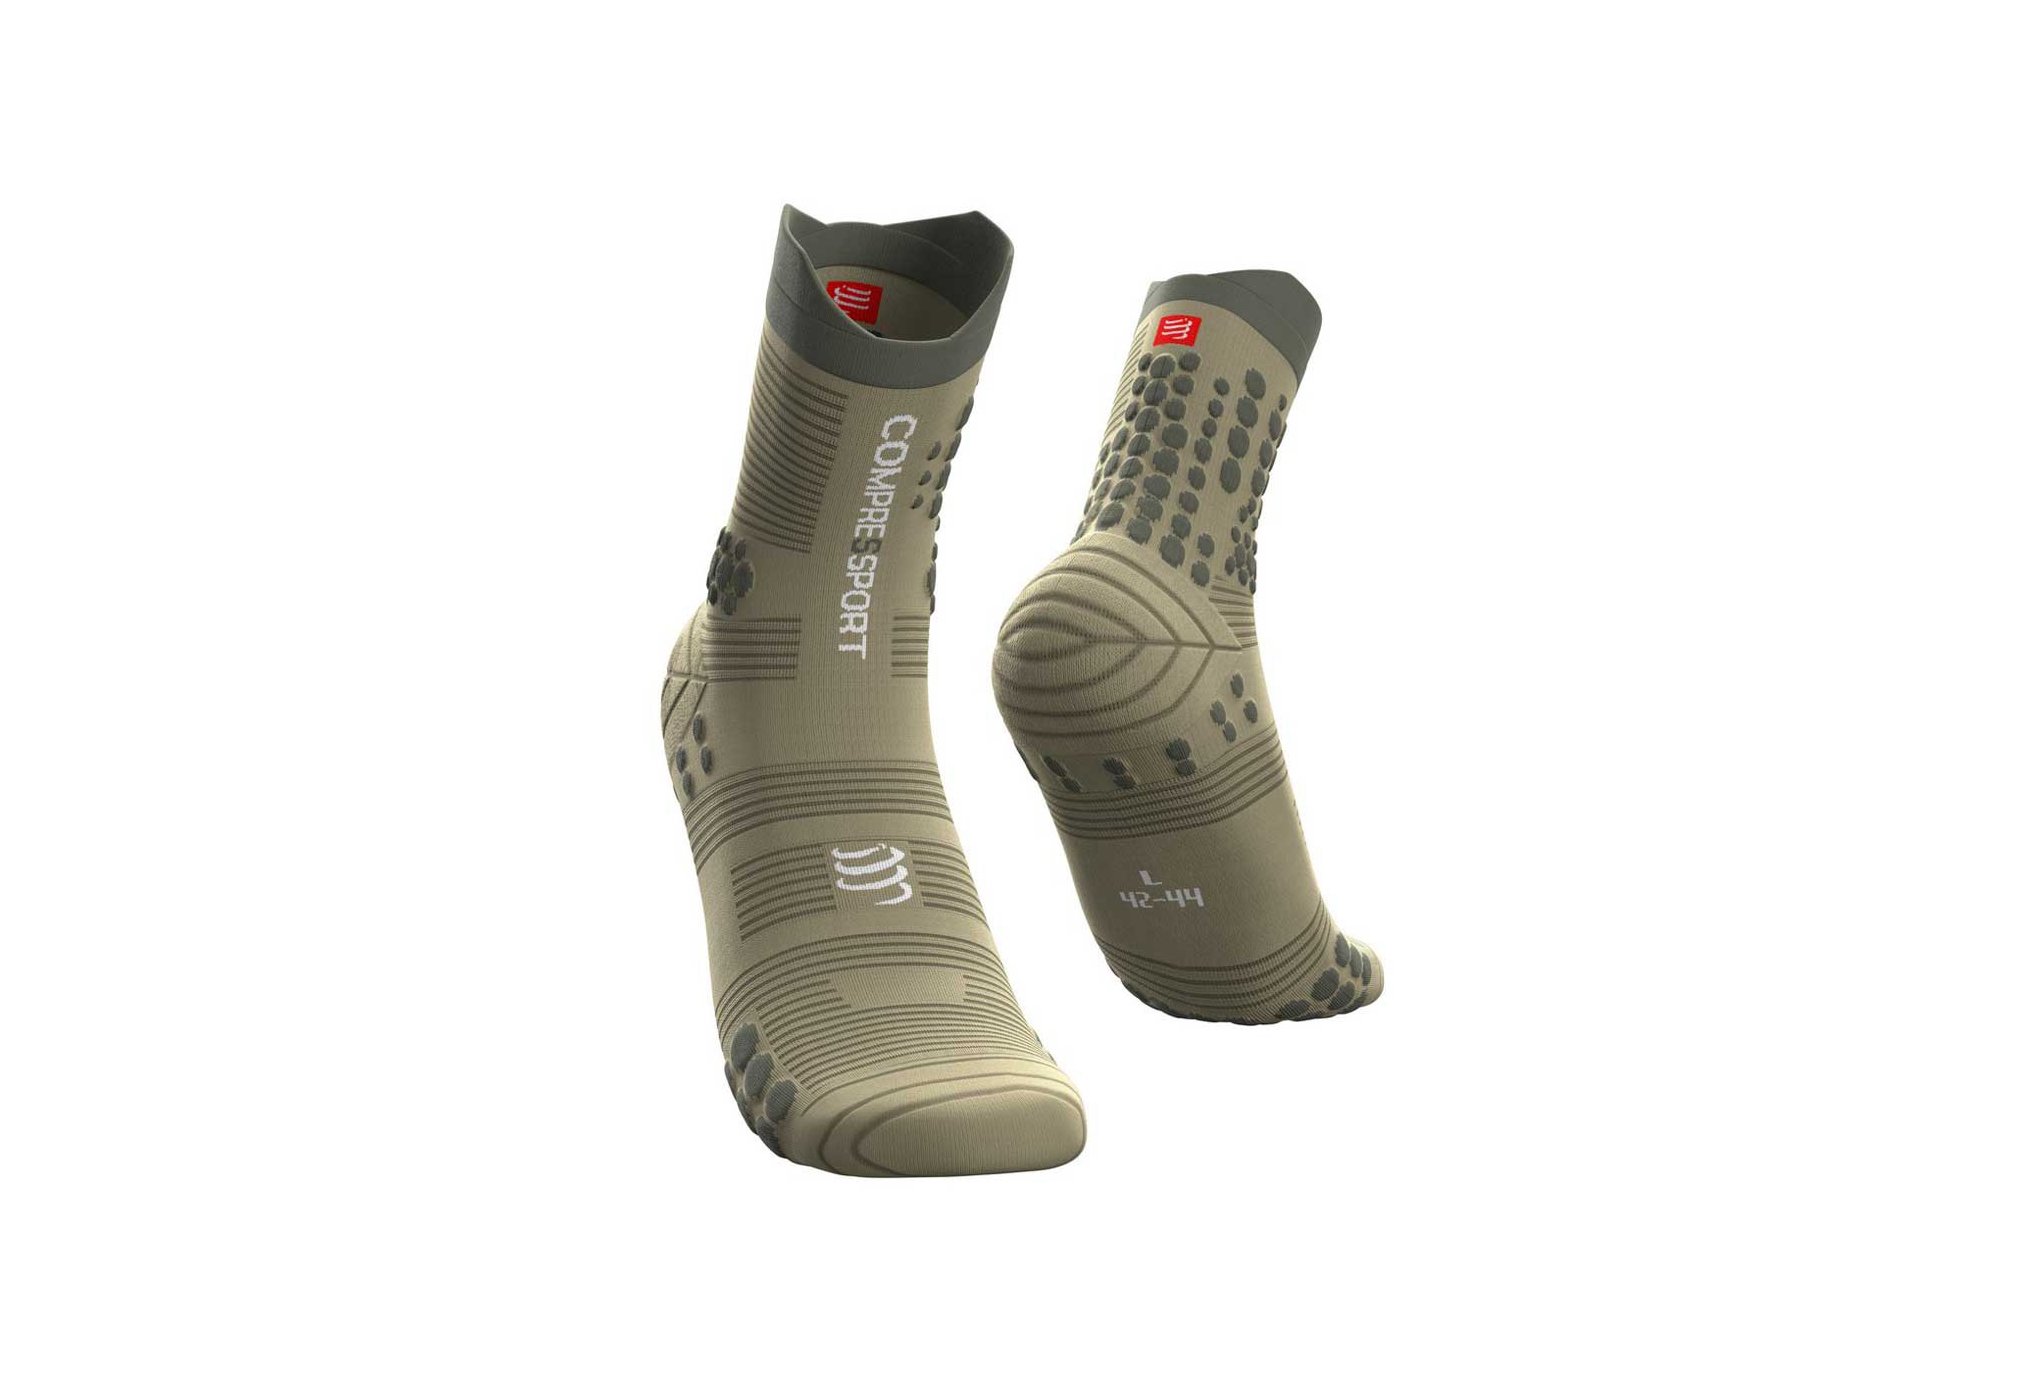 Compressport Pro Racing V 3.0 Trail Chaussettes